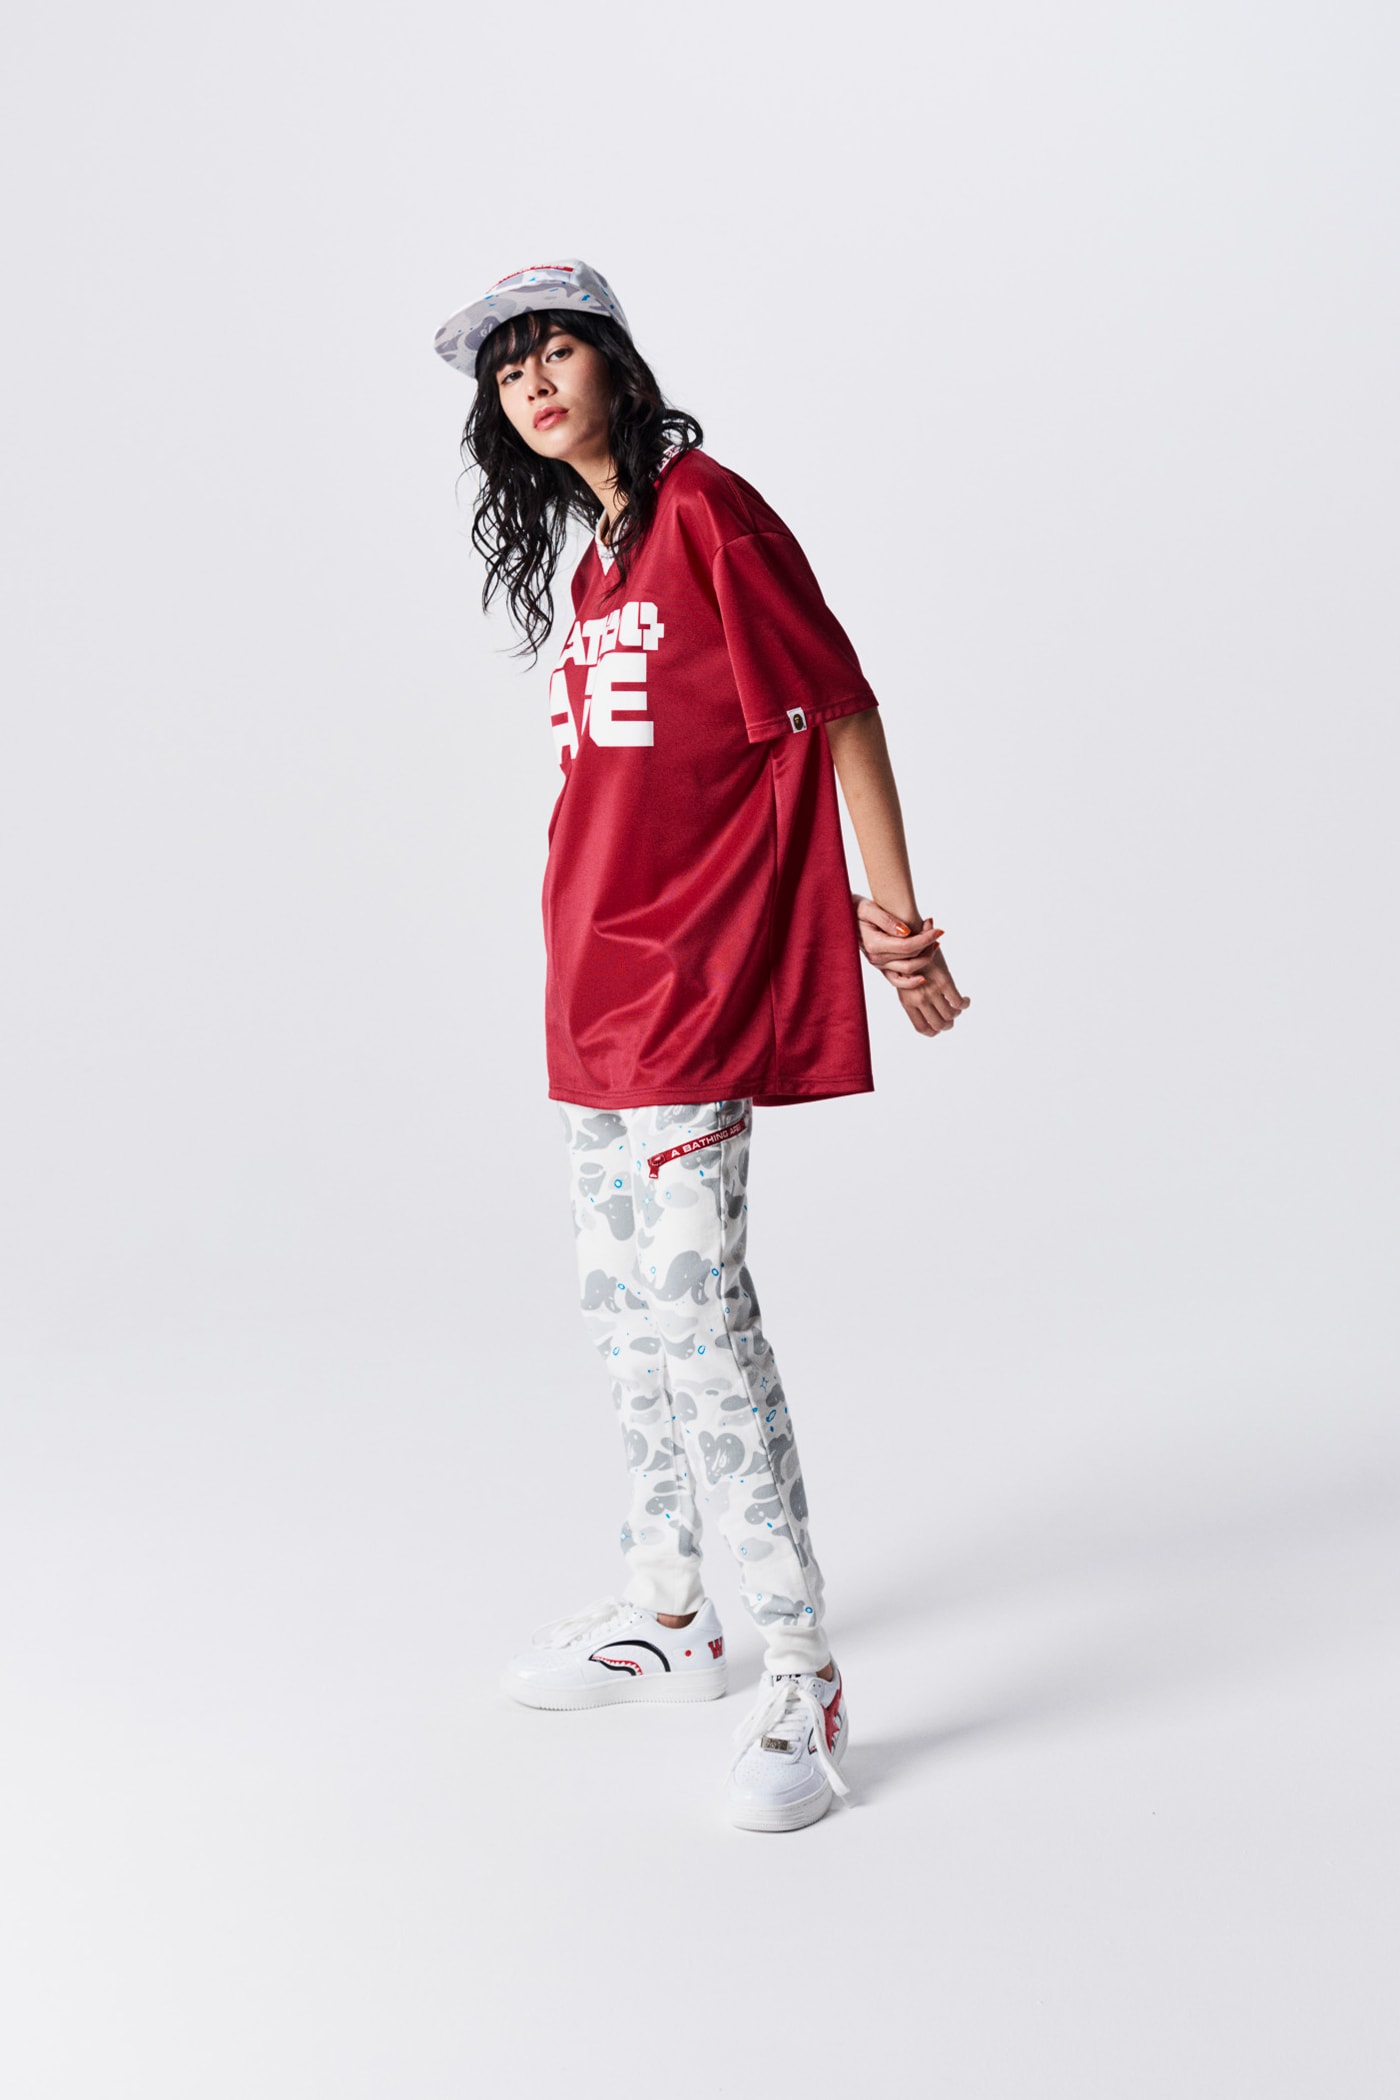 A Bathing Ape Spring Summer 2019 Collection T-shirt Red Camo Pants White Blue